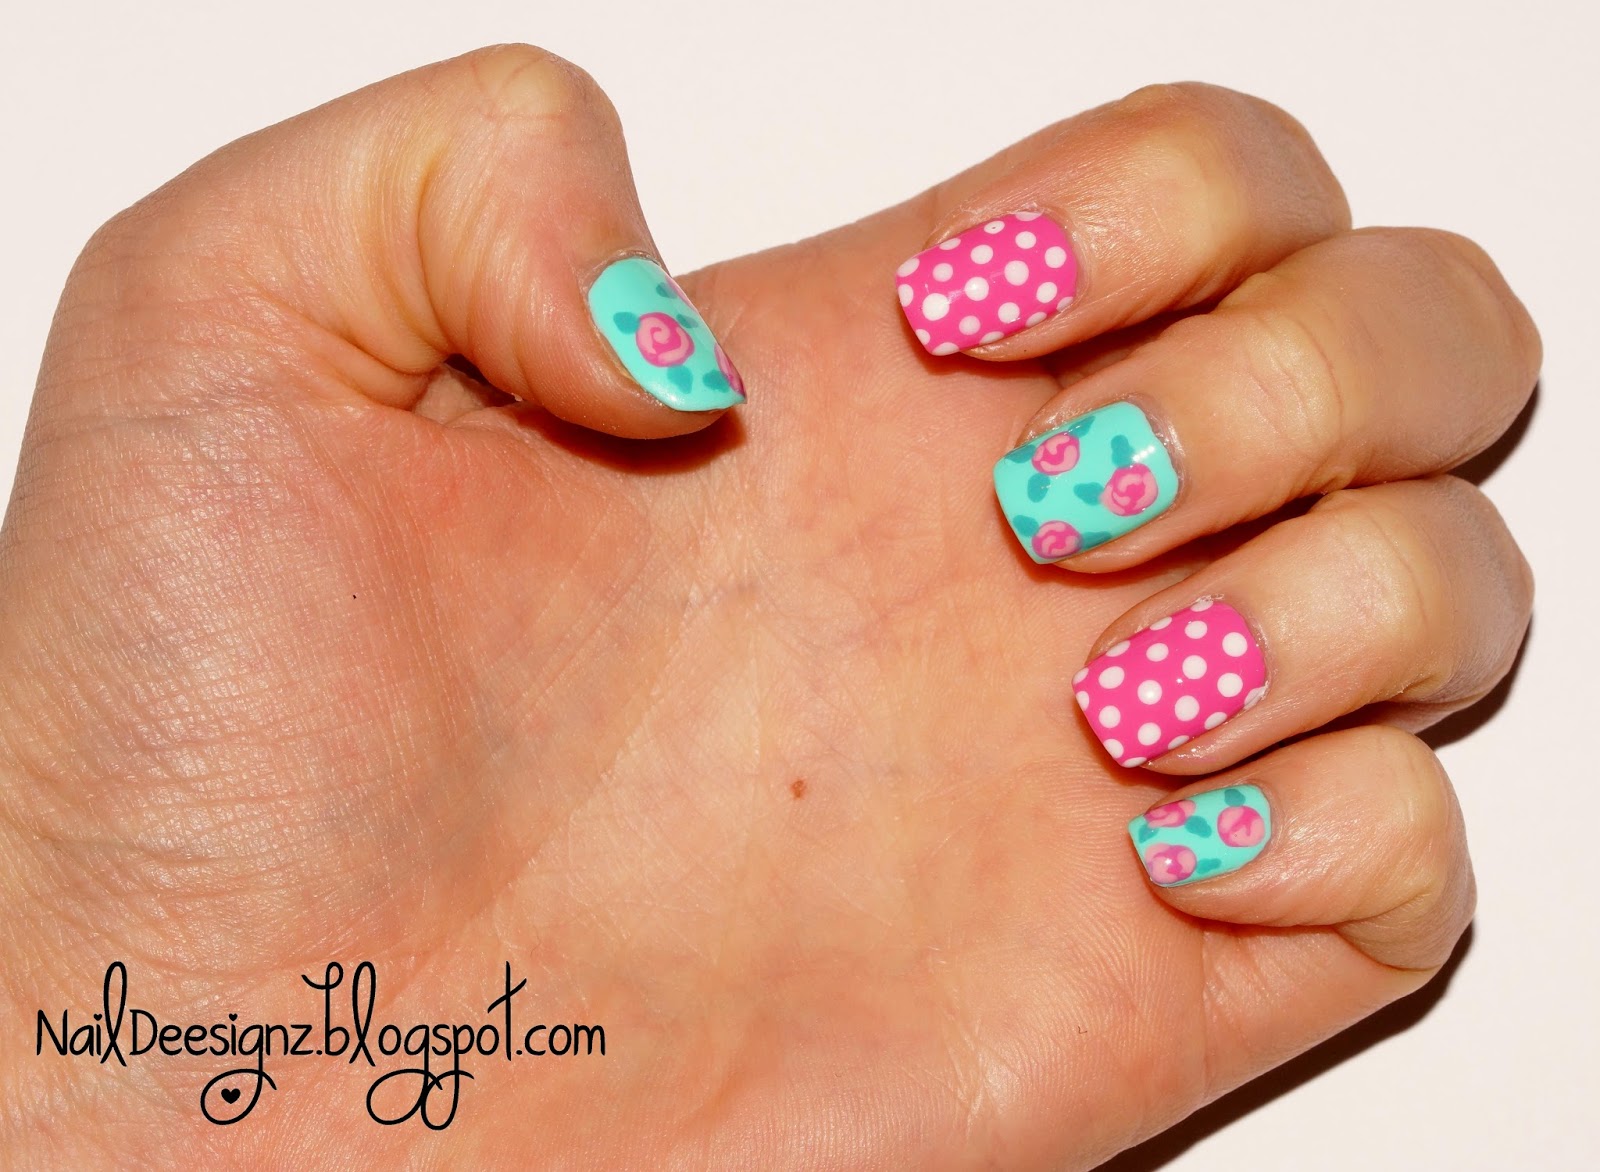 Chic Nail Art Designs - wide 11